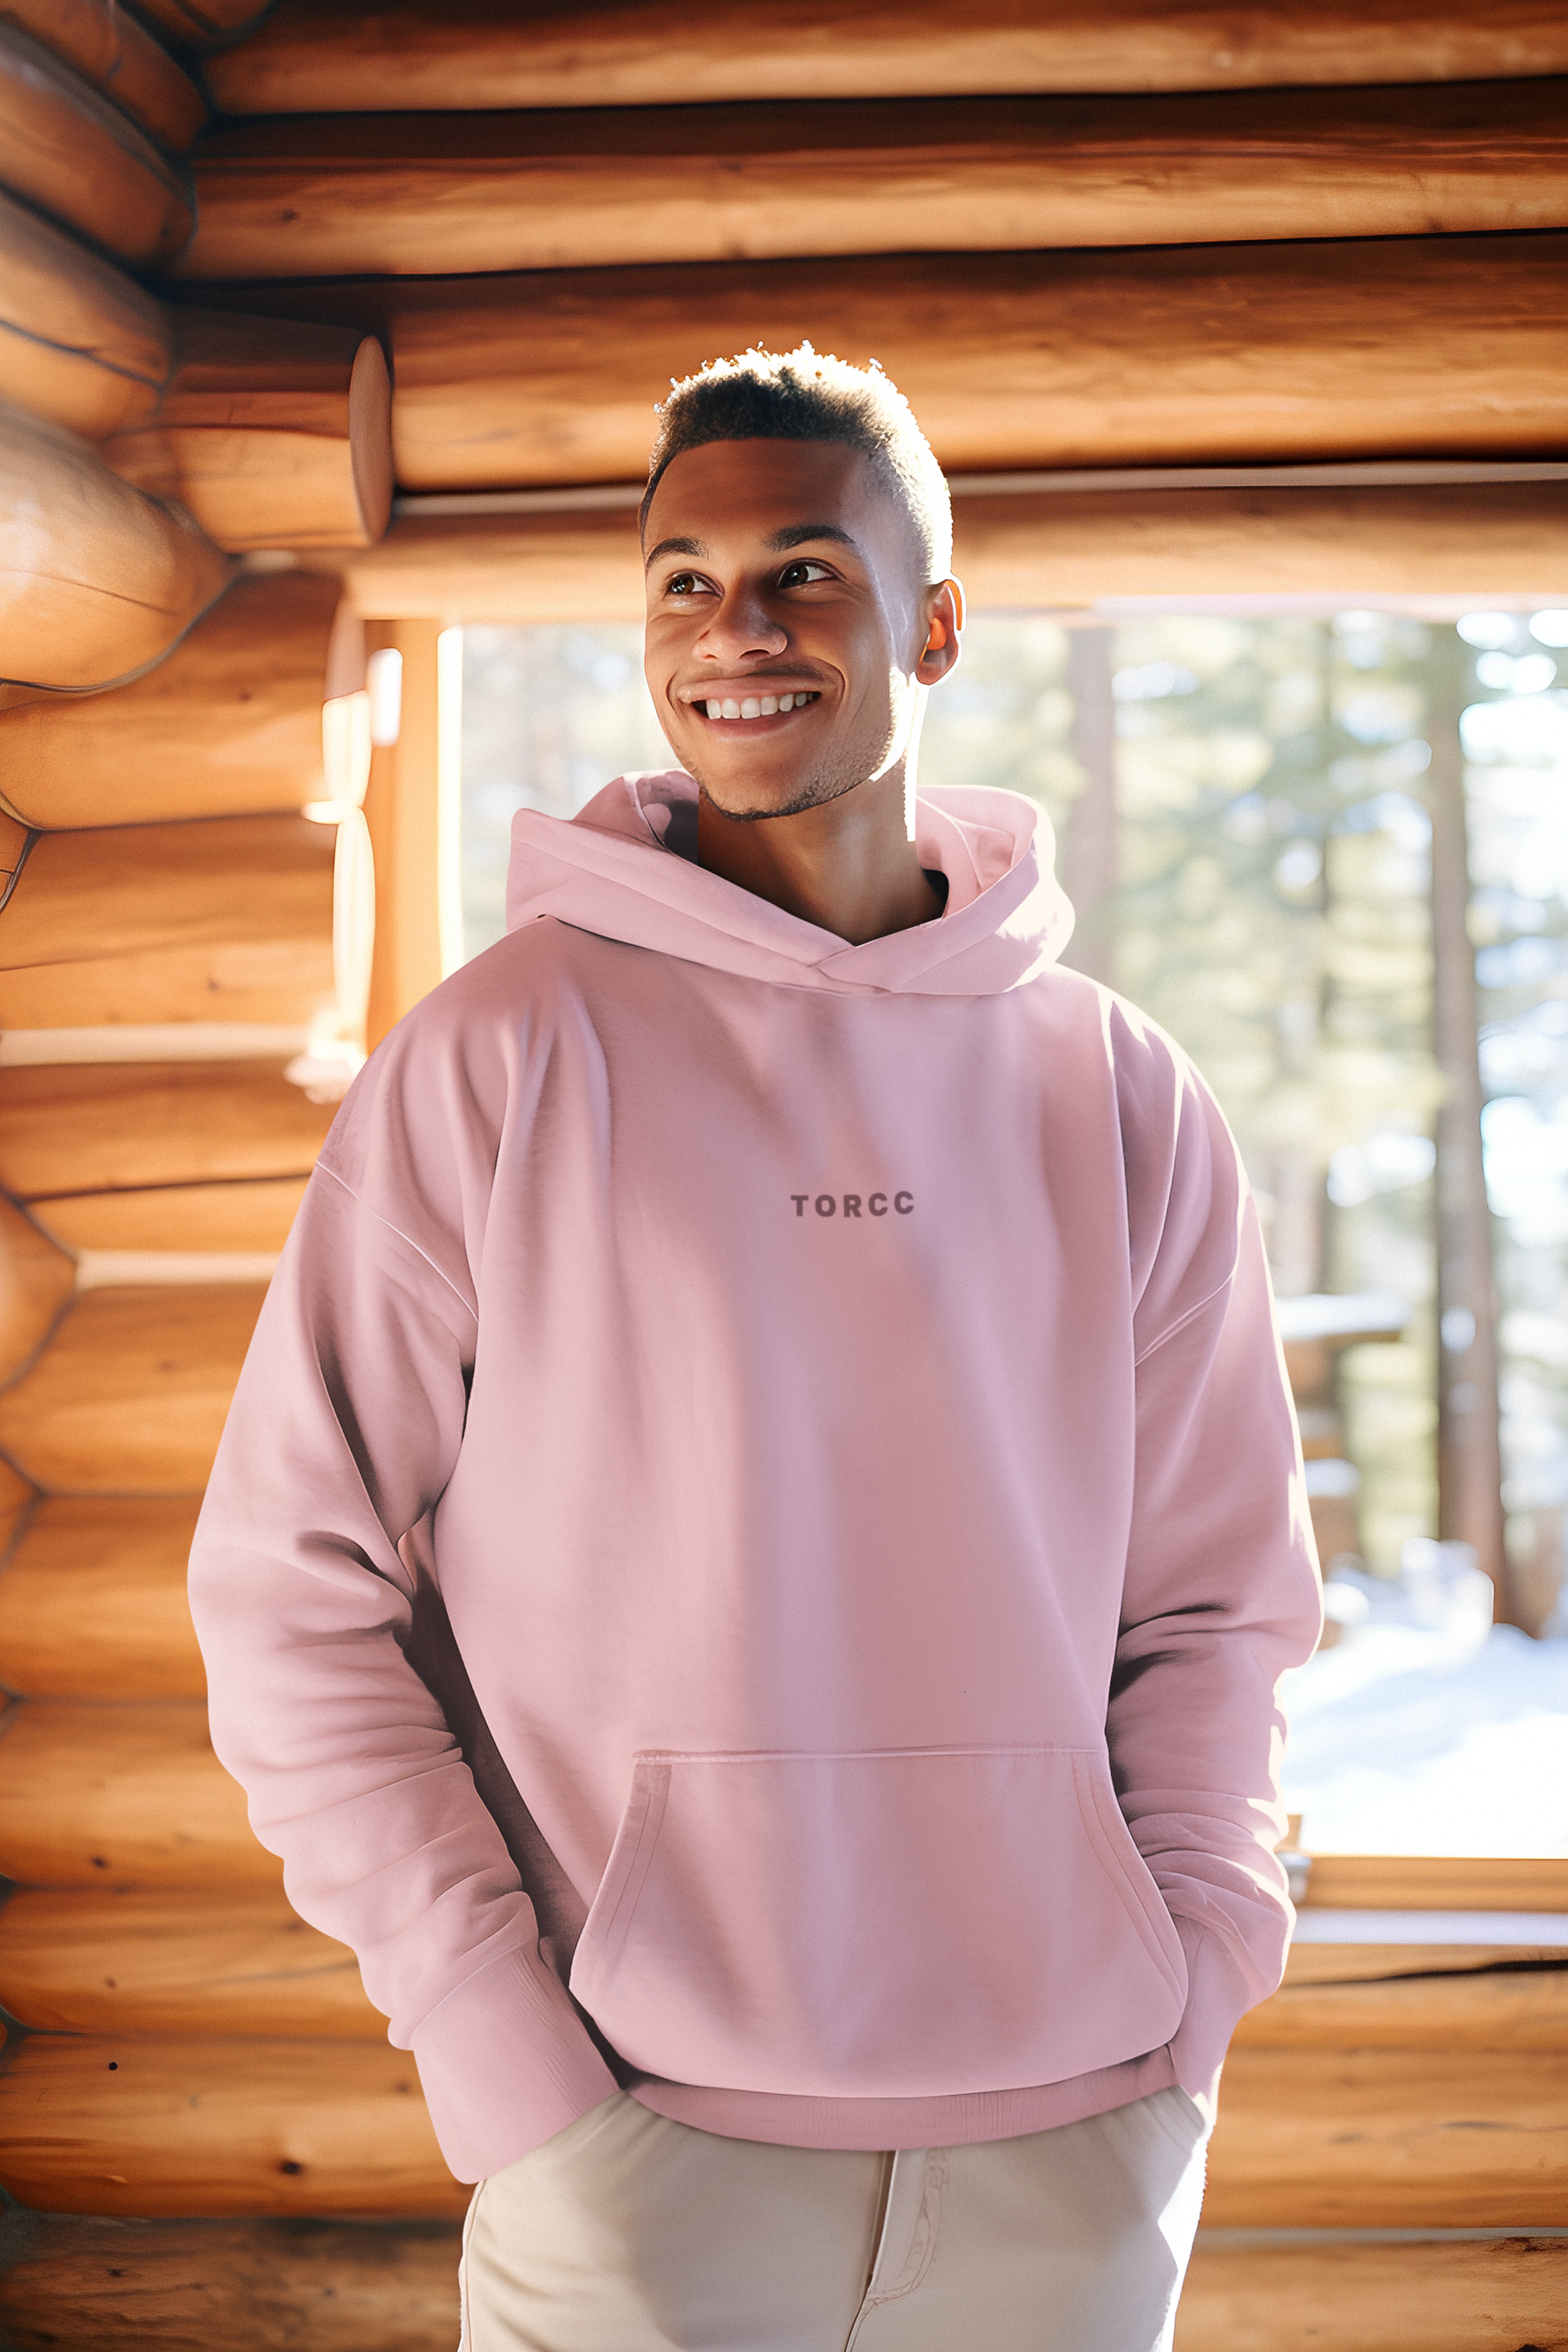 Peach Pink Blank Hoodie for Men and Womenoversized tshirt for men, oversized tshirt for women, graphic oversized tshirt, streetwear oversized tshirt, oversized tshirt, oversized tee, hoodie for men, hoodie for women, hoodie men, hoodies on sale